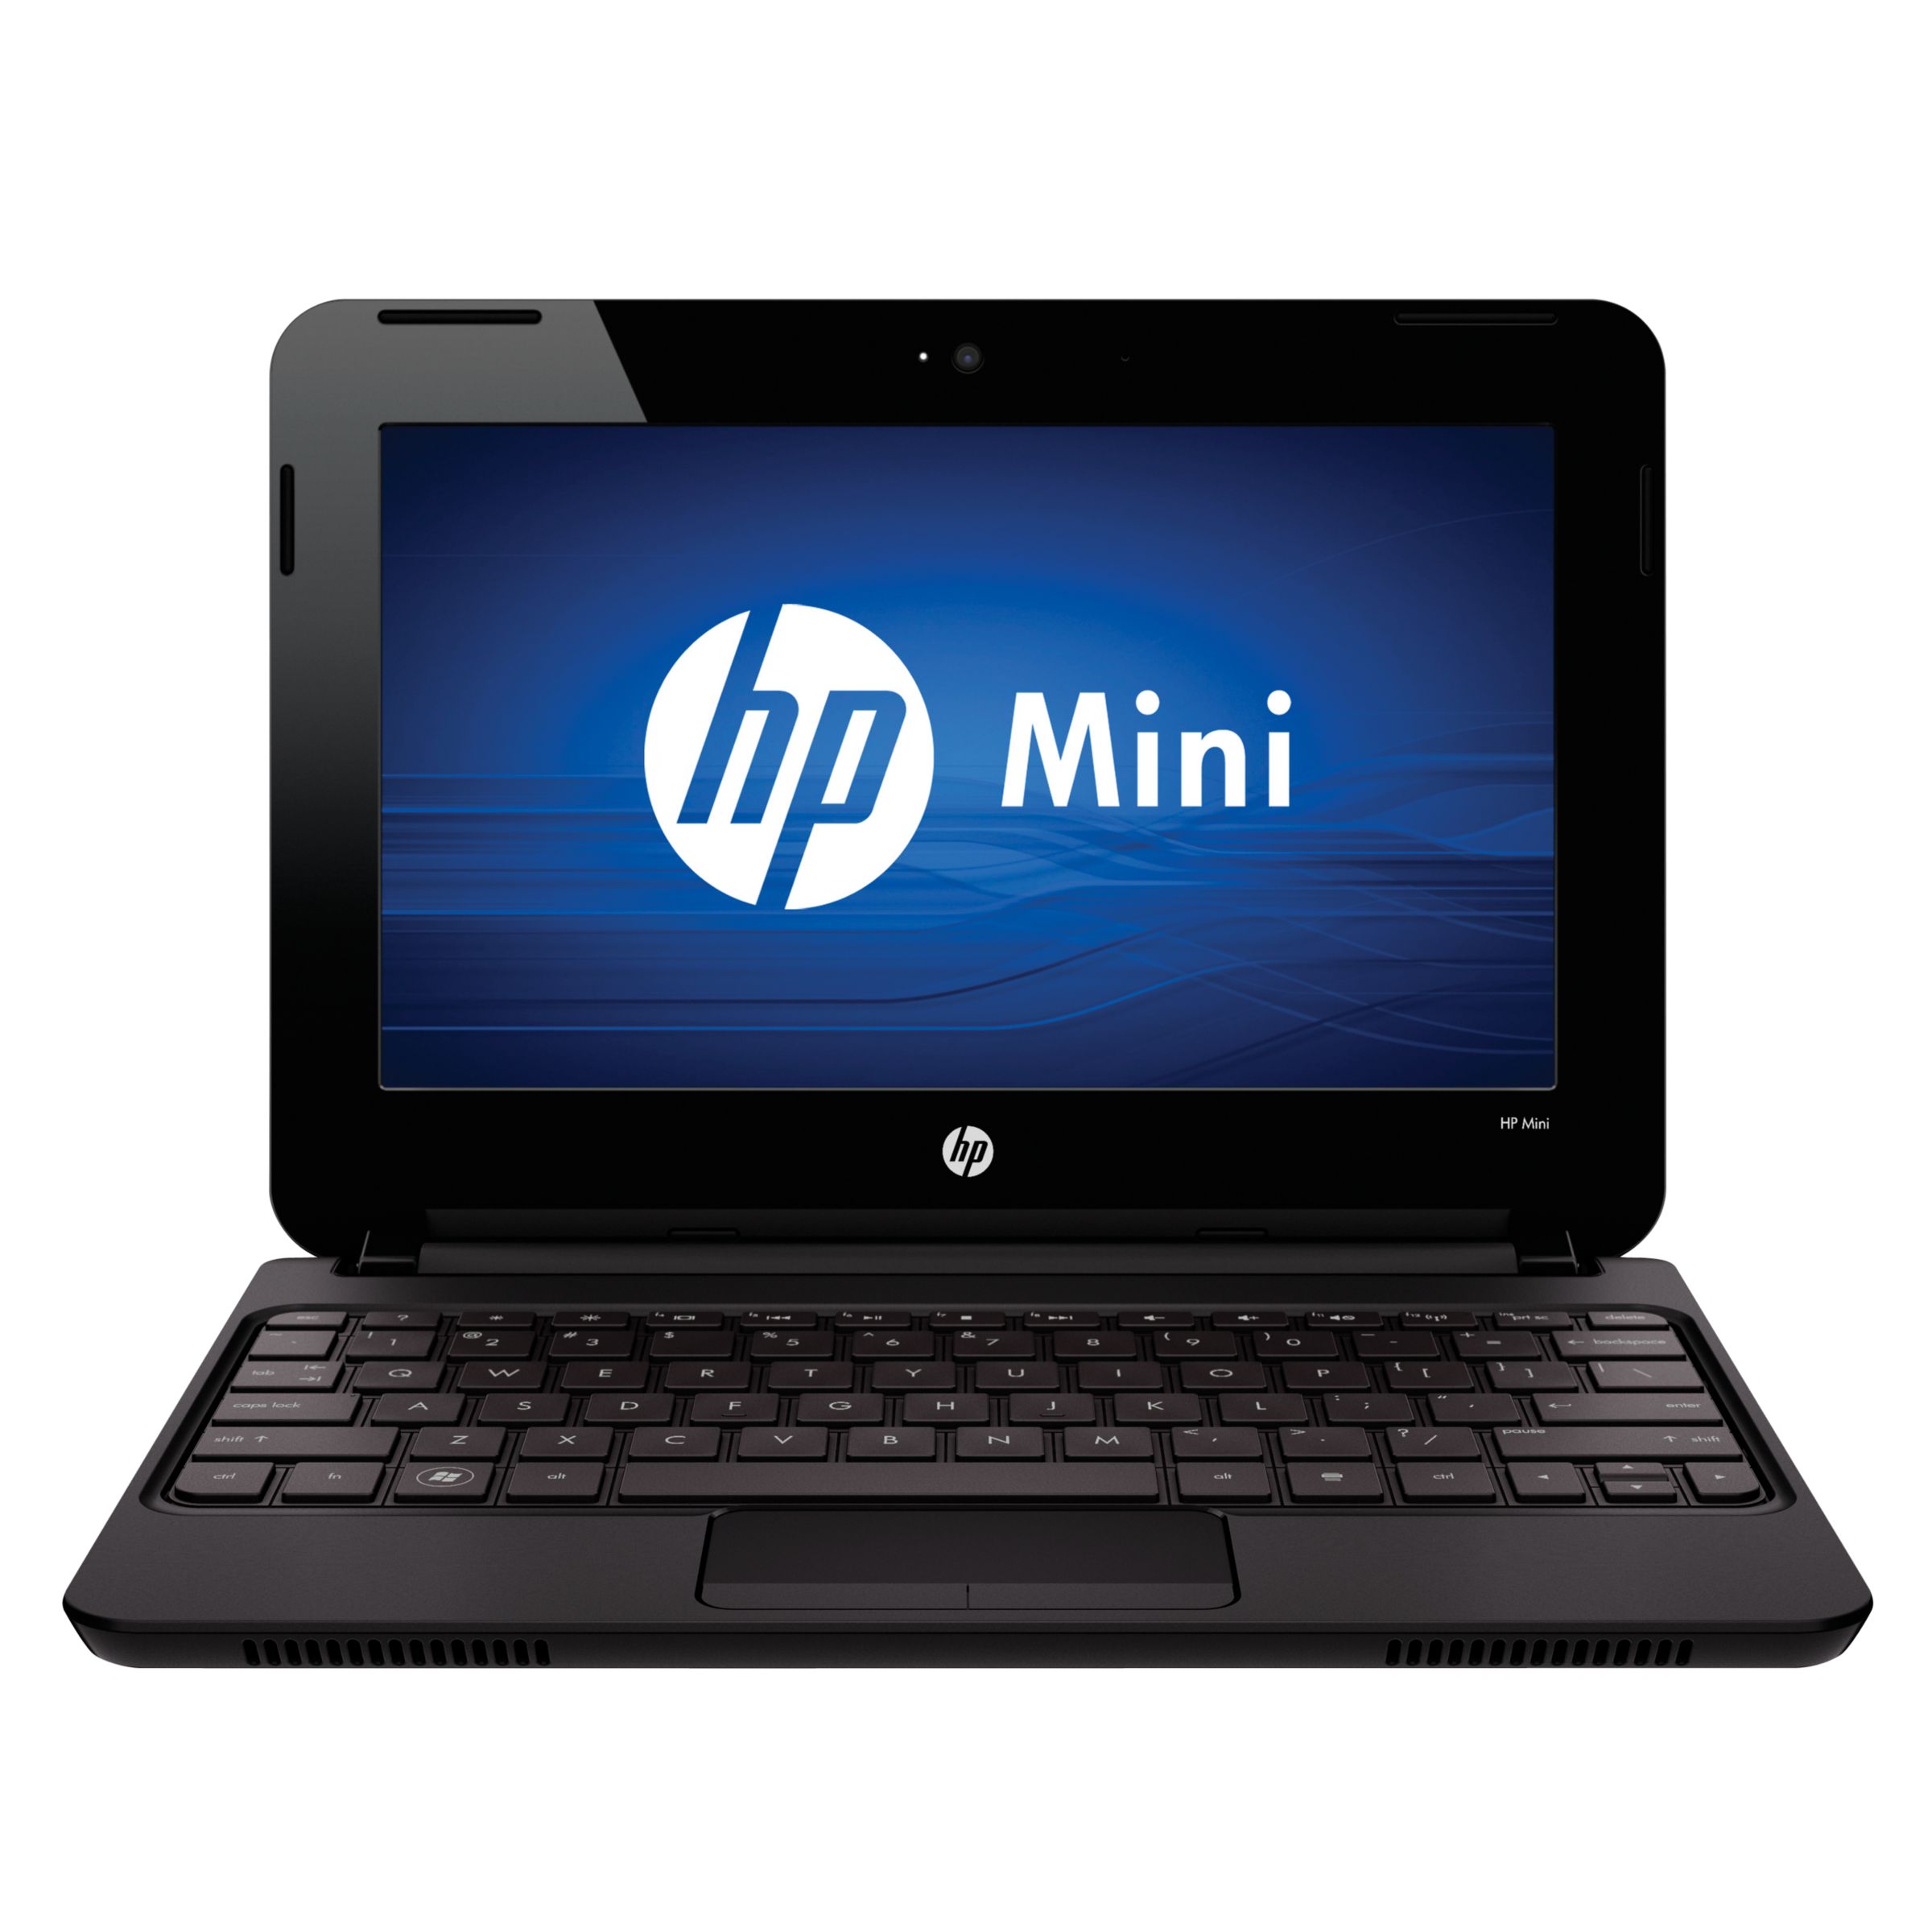 HP Mini 110-3102 Netbook, 1.66GHz with 10.1 Inch Display, Blue at JohnLewis